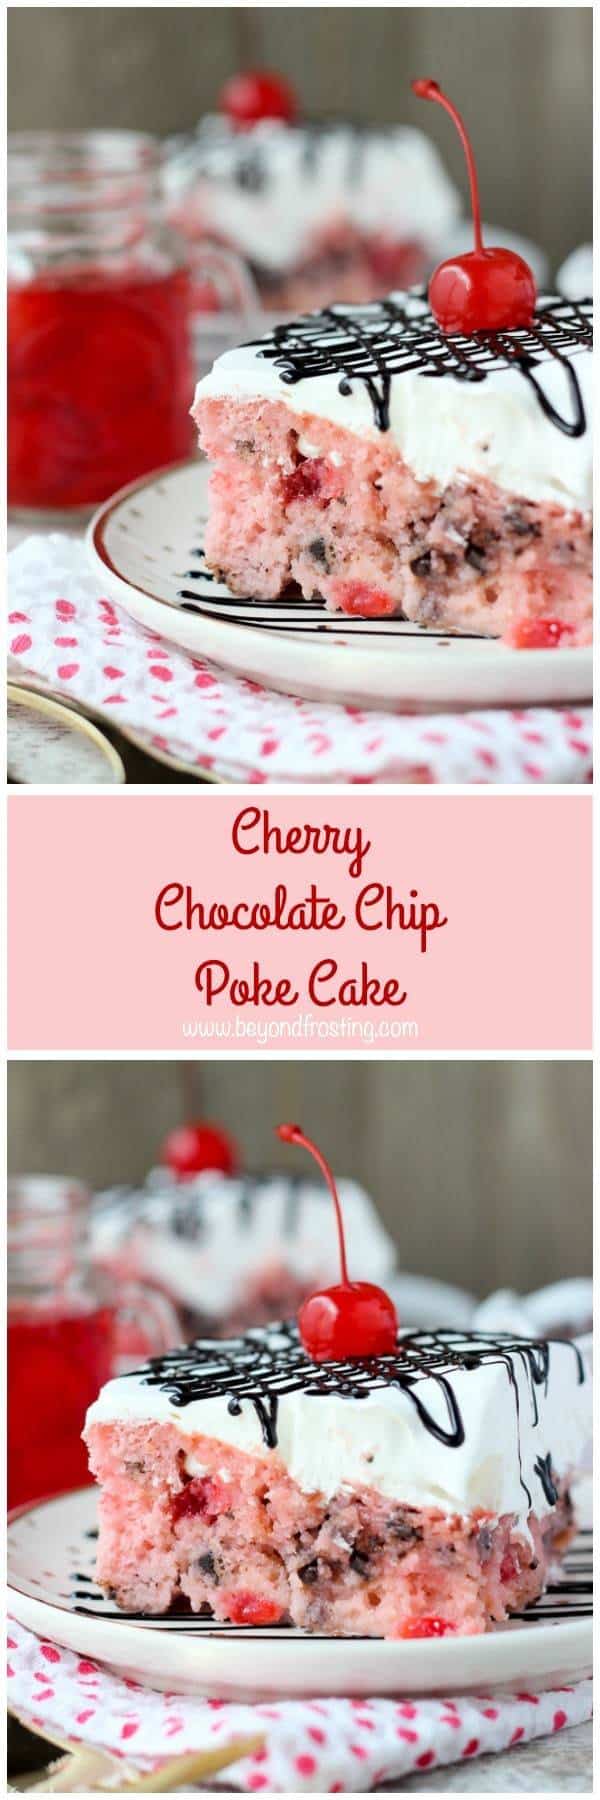  This Cherry Chocolate Chip Poke Cake is a sweet cherry cake with chocolate chips, soaked in sweetened condensed milk and topped with whipped cream and chocolate sauce.